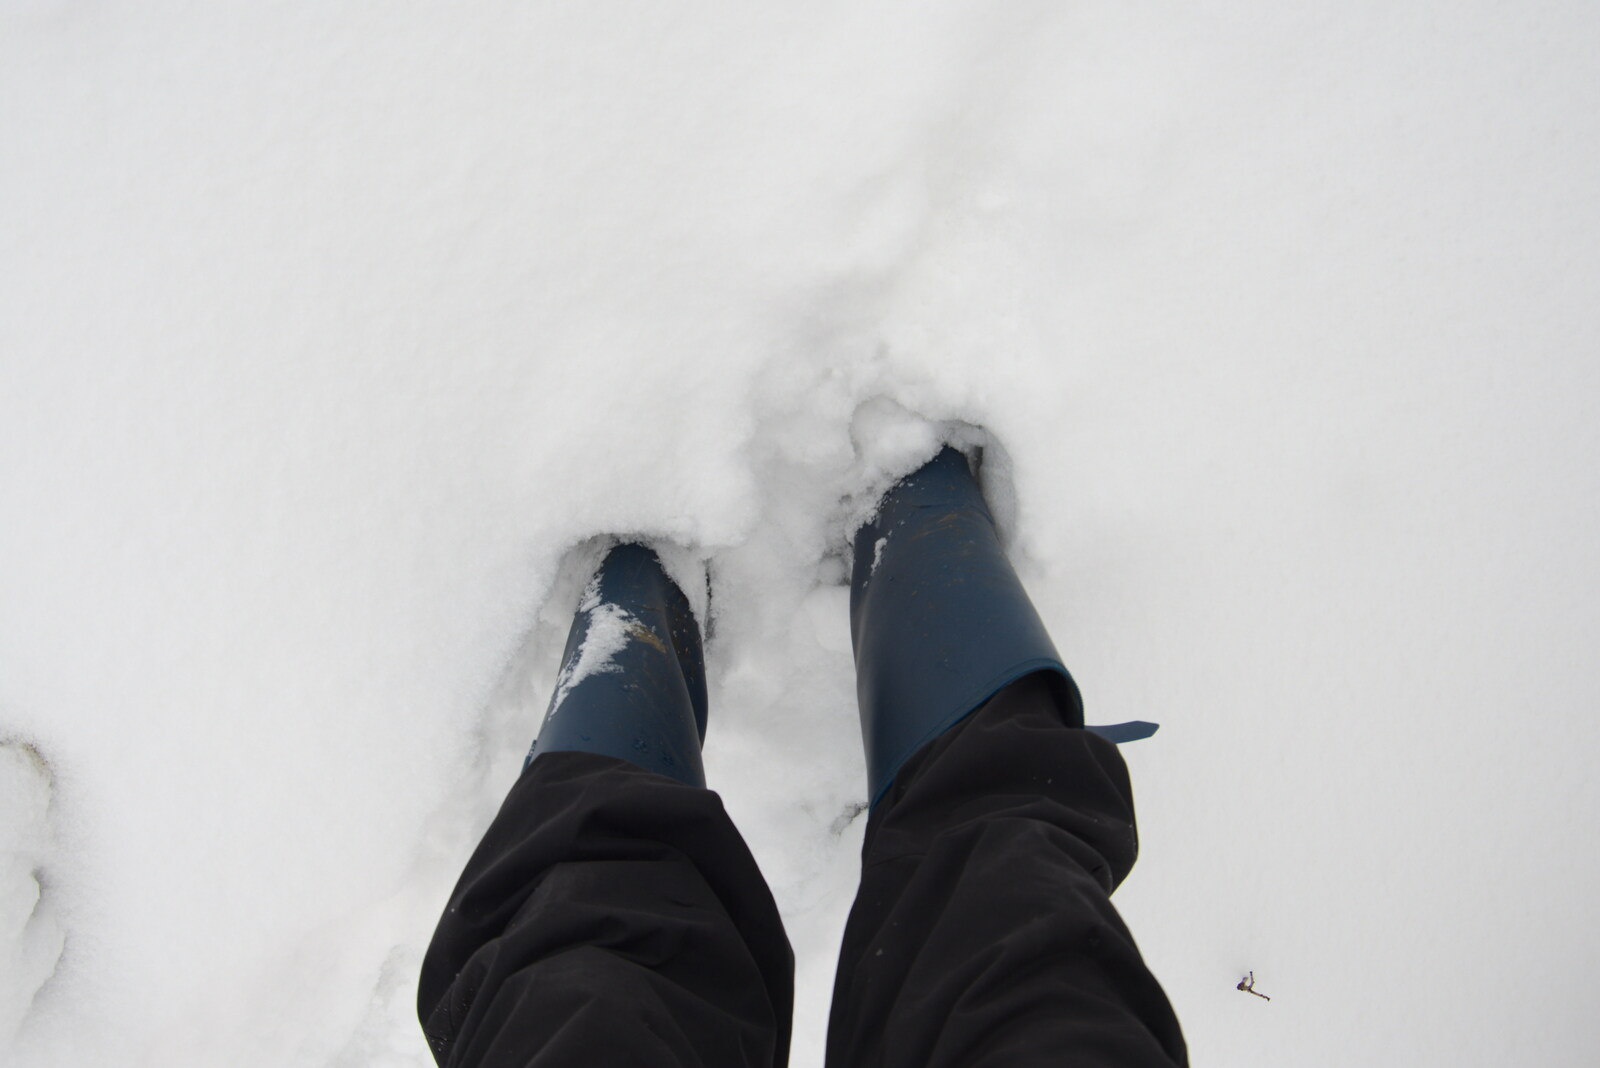 It's deep enough to cover up welly boots from Beast From The East Two - The Sequel, Brome, Suffolk - 8th February 2021